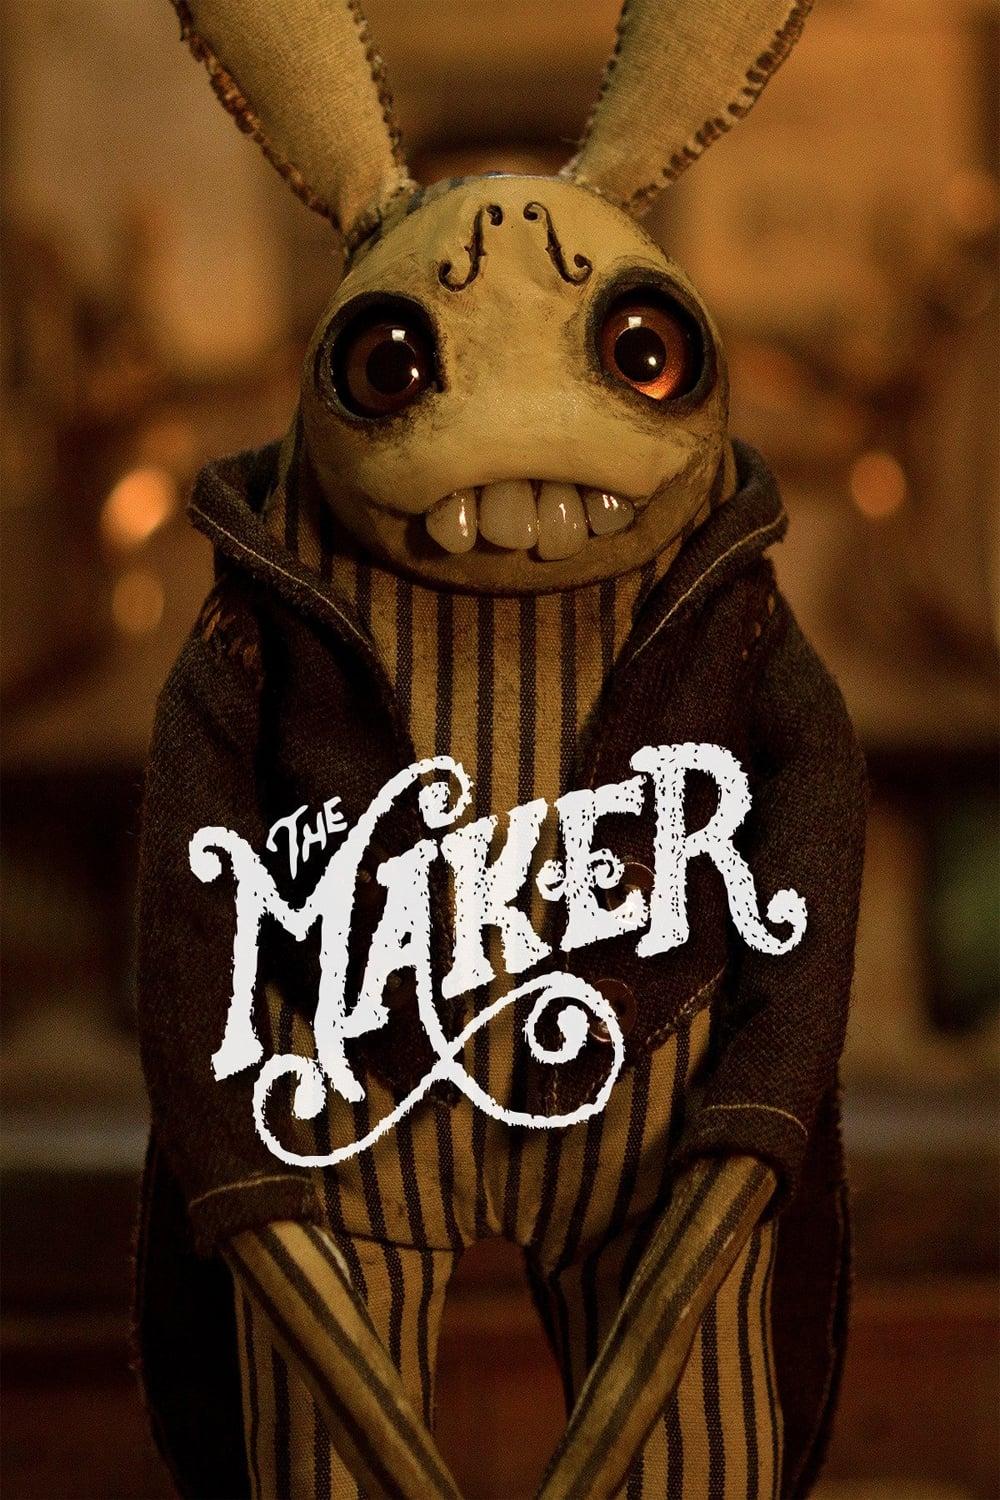 The Maker poster